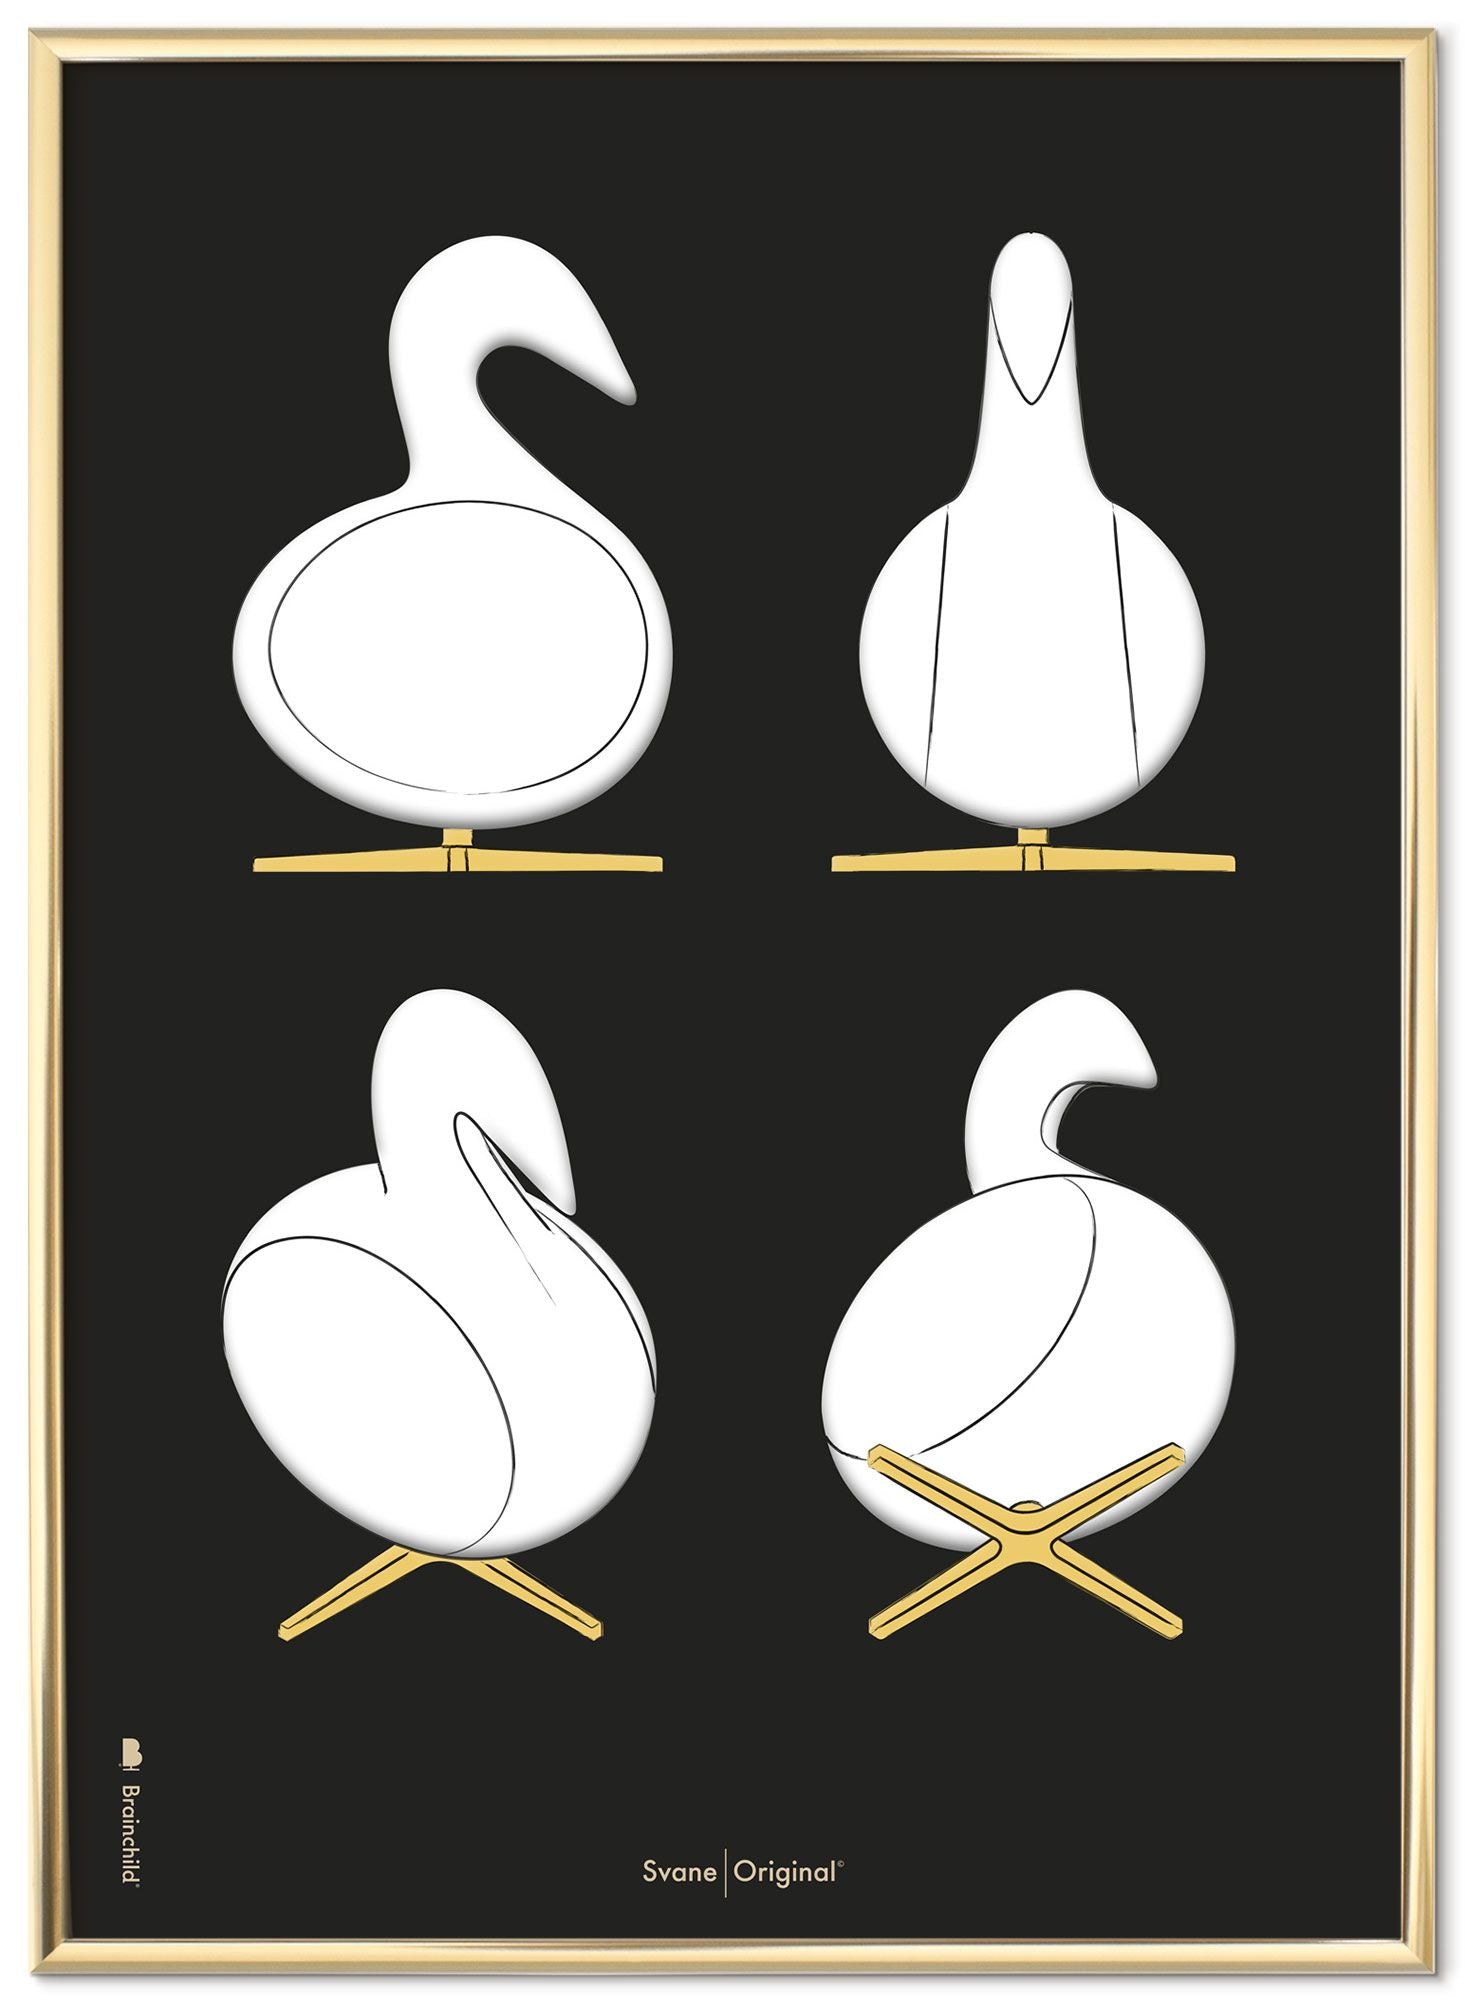 Brainchild The Swan Design Sketches Poster Frame Made Of Brass Colored Metal 70x100 Cm, Black Baggrund